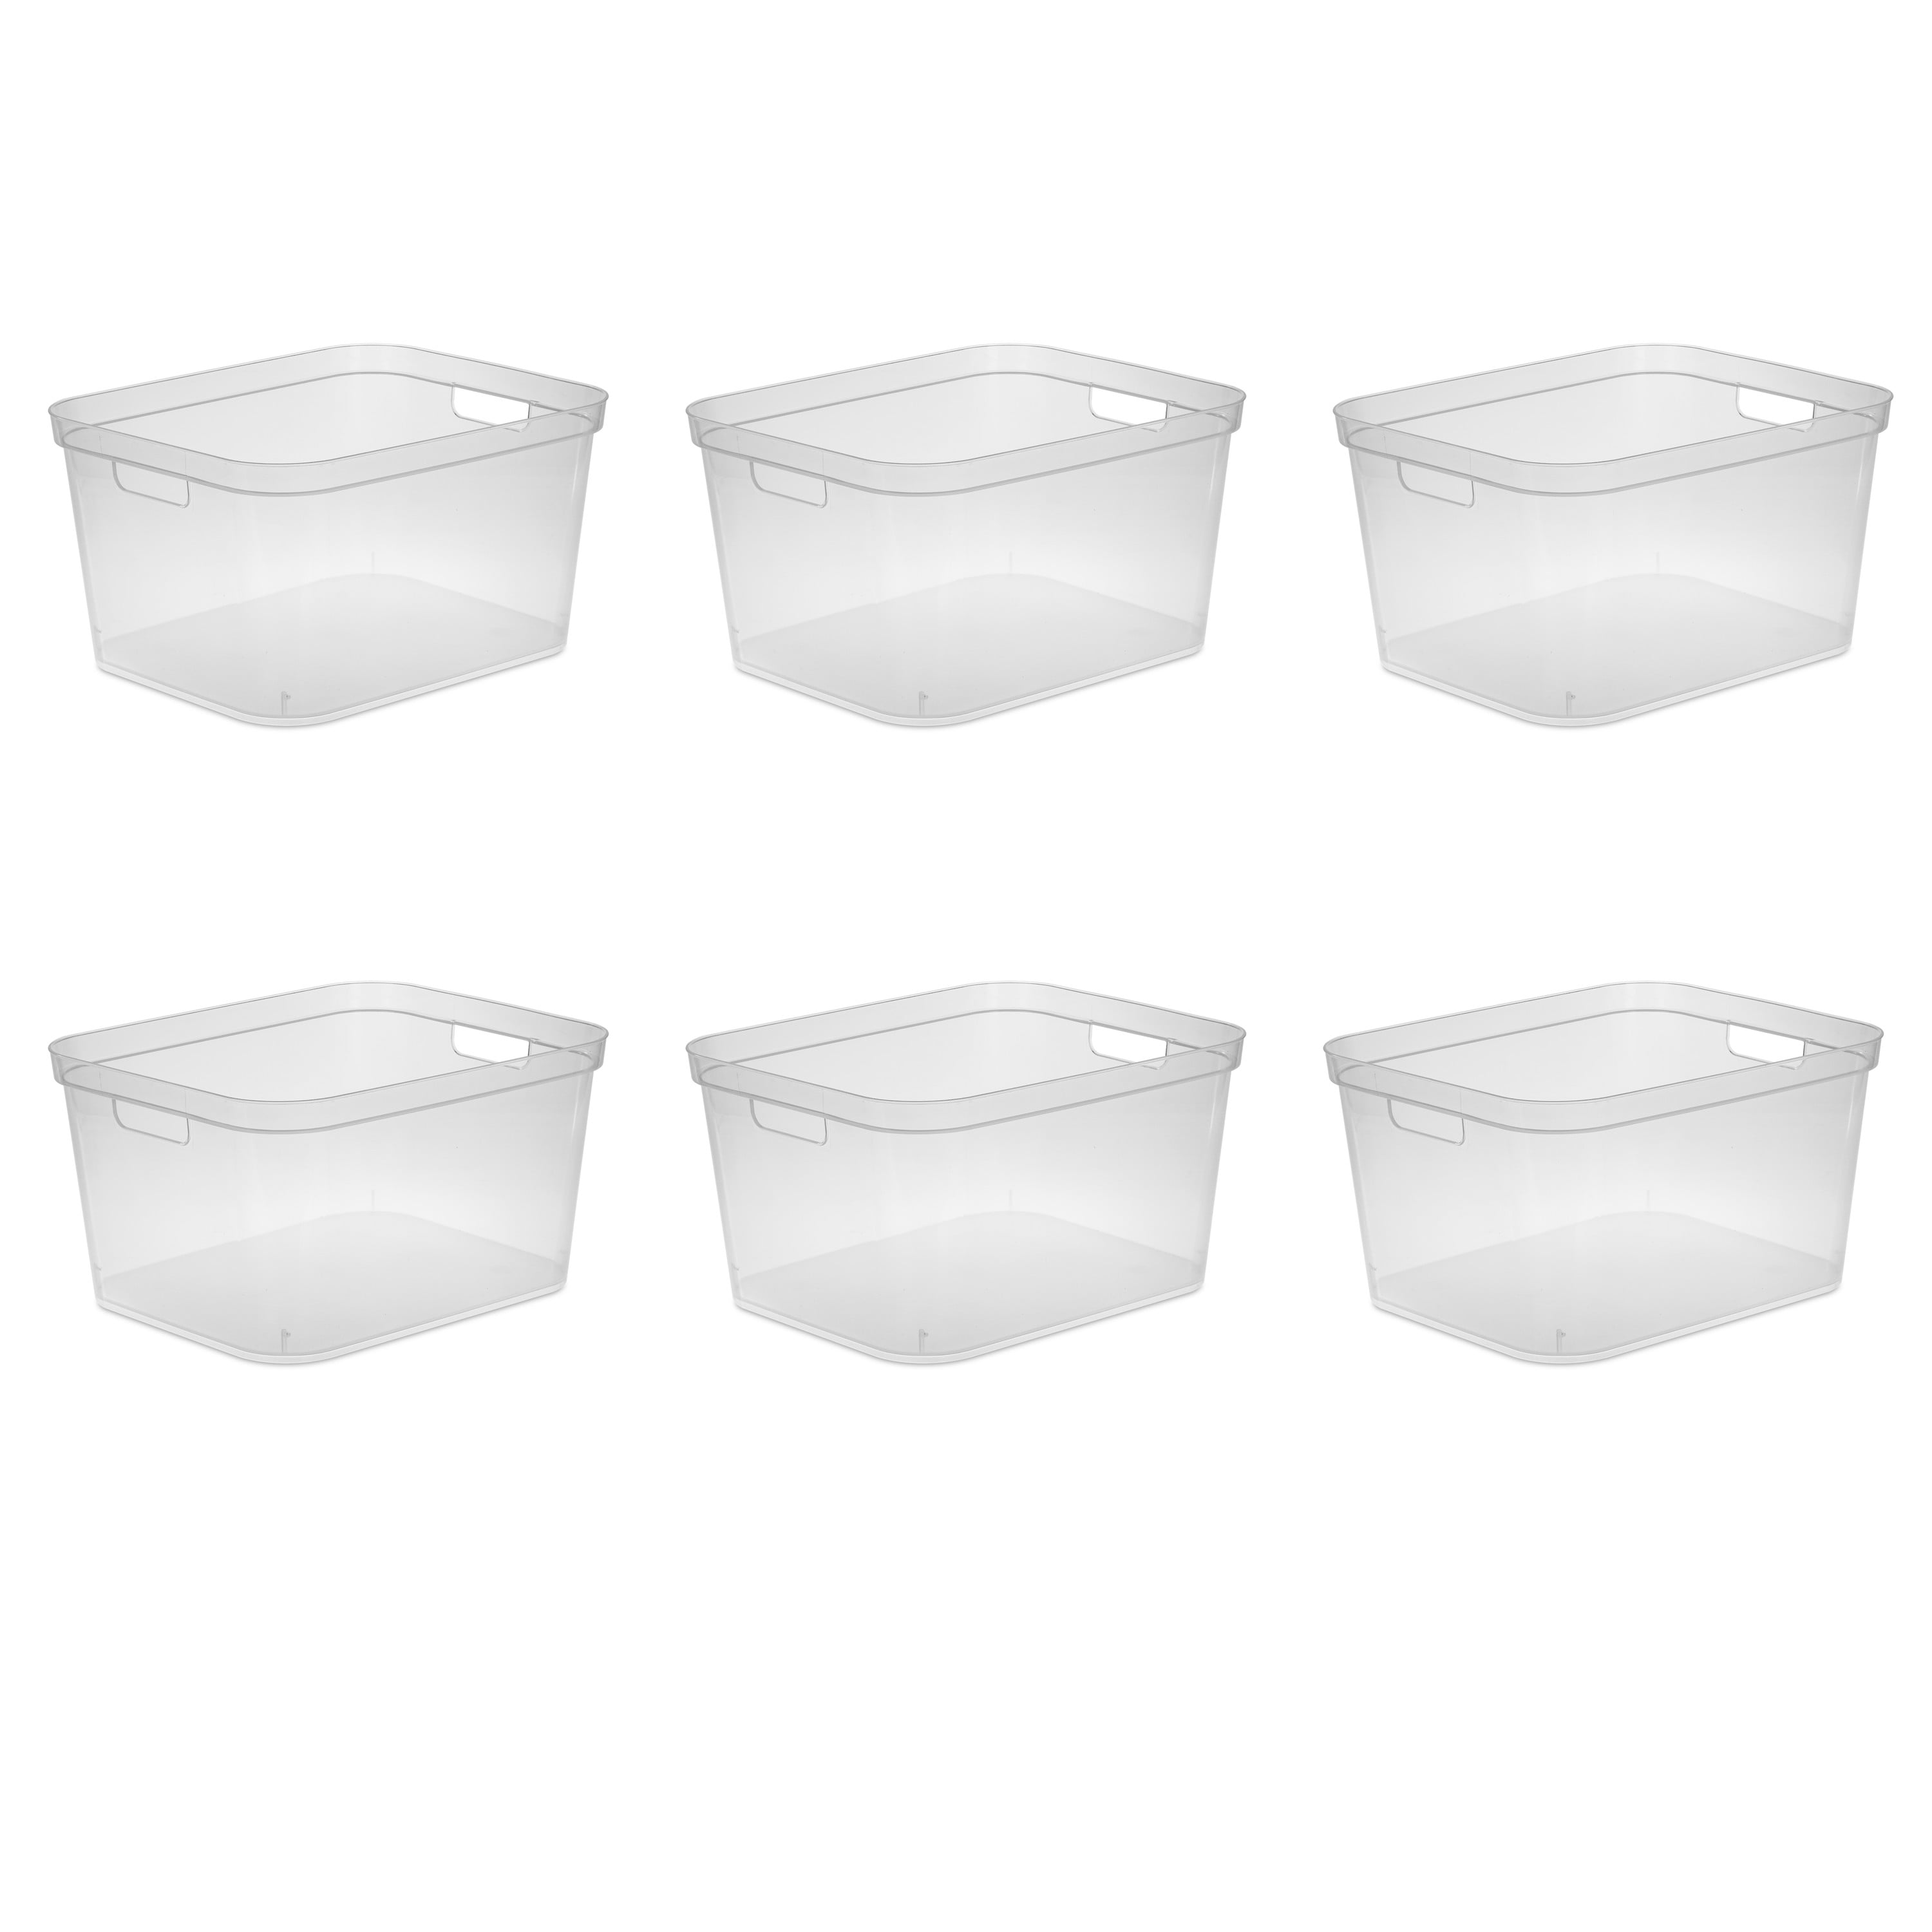 Sterilite 6 Qt. Clear Closet Storage Bin Container with White Lid (72-Pack)  72 x 16428036 - The Home Depot